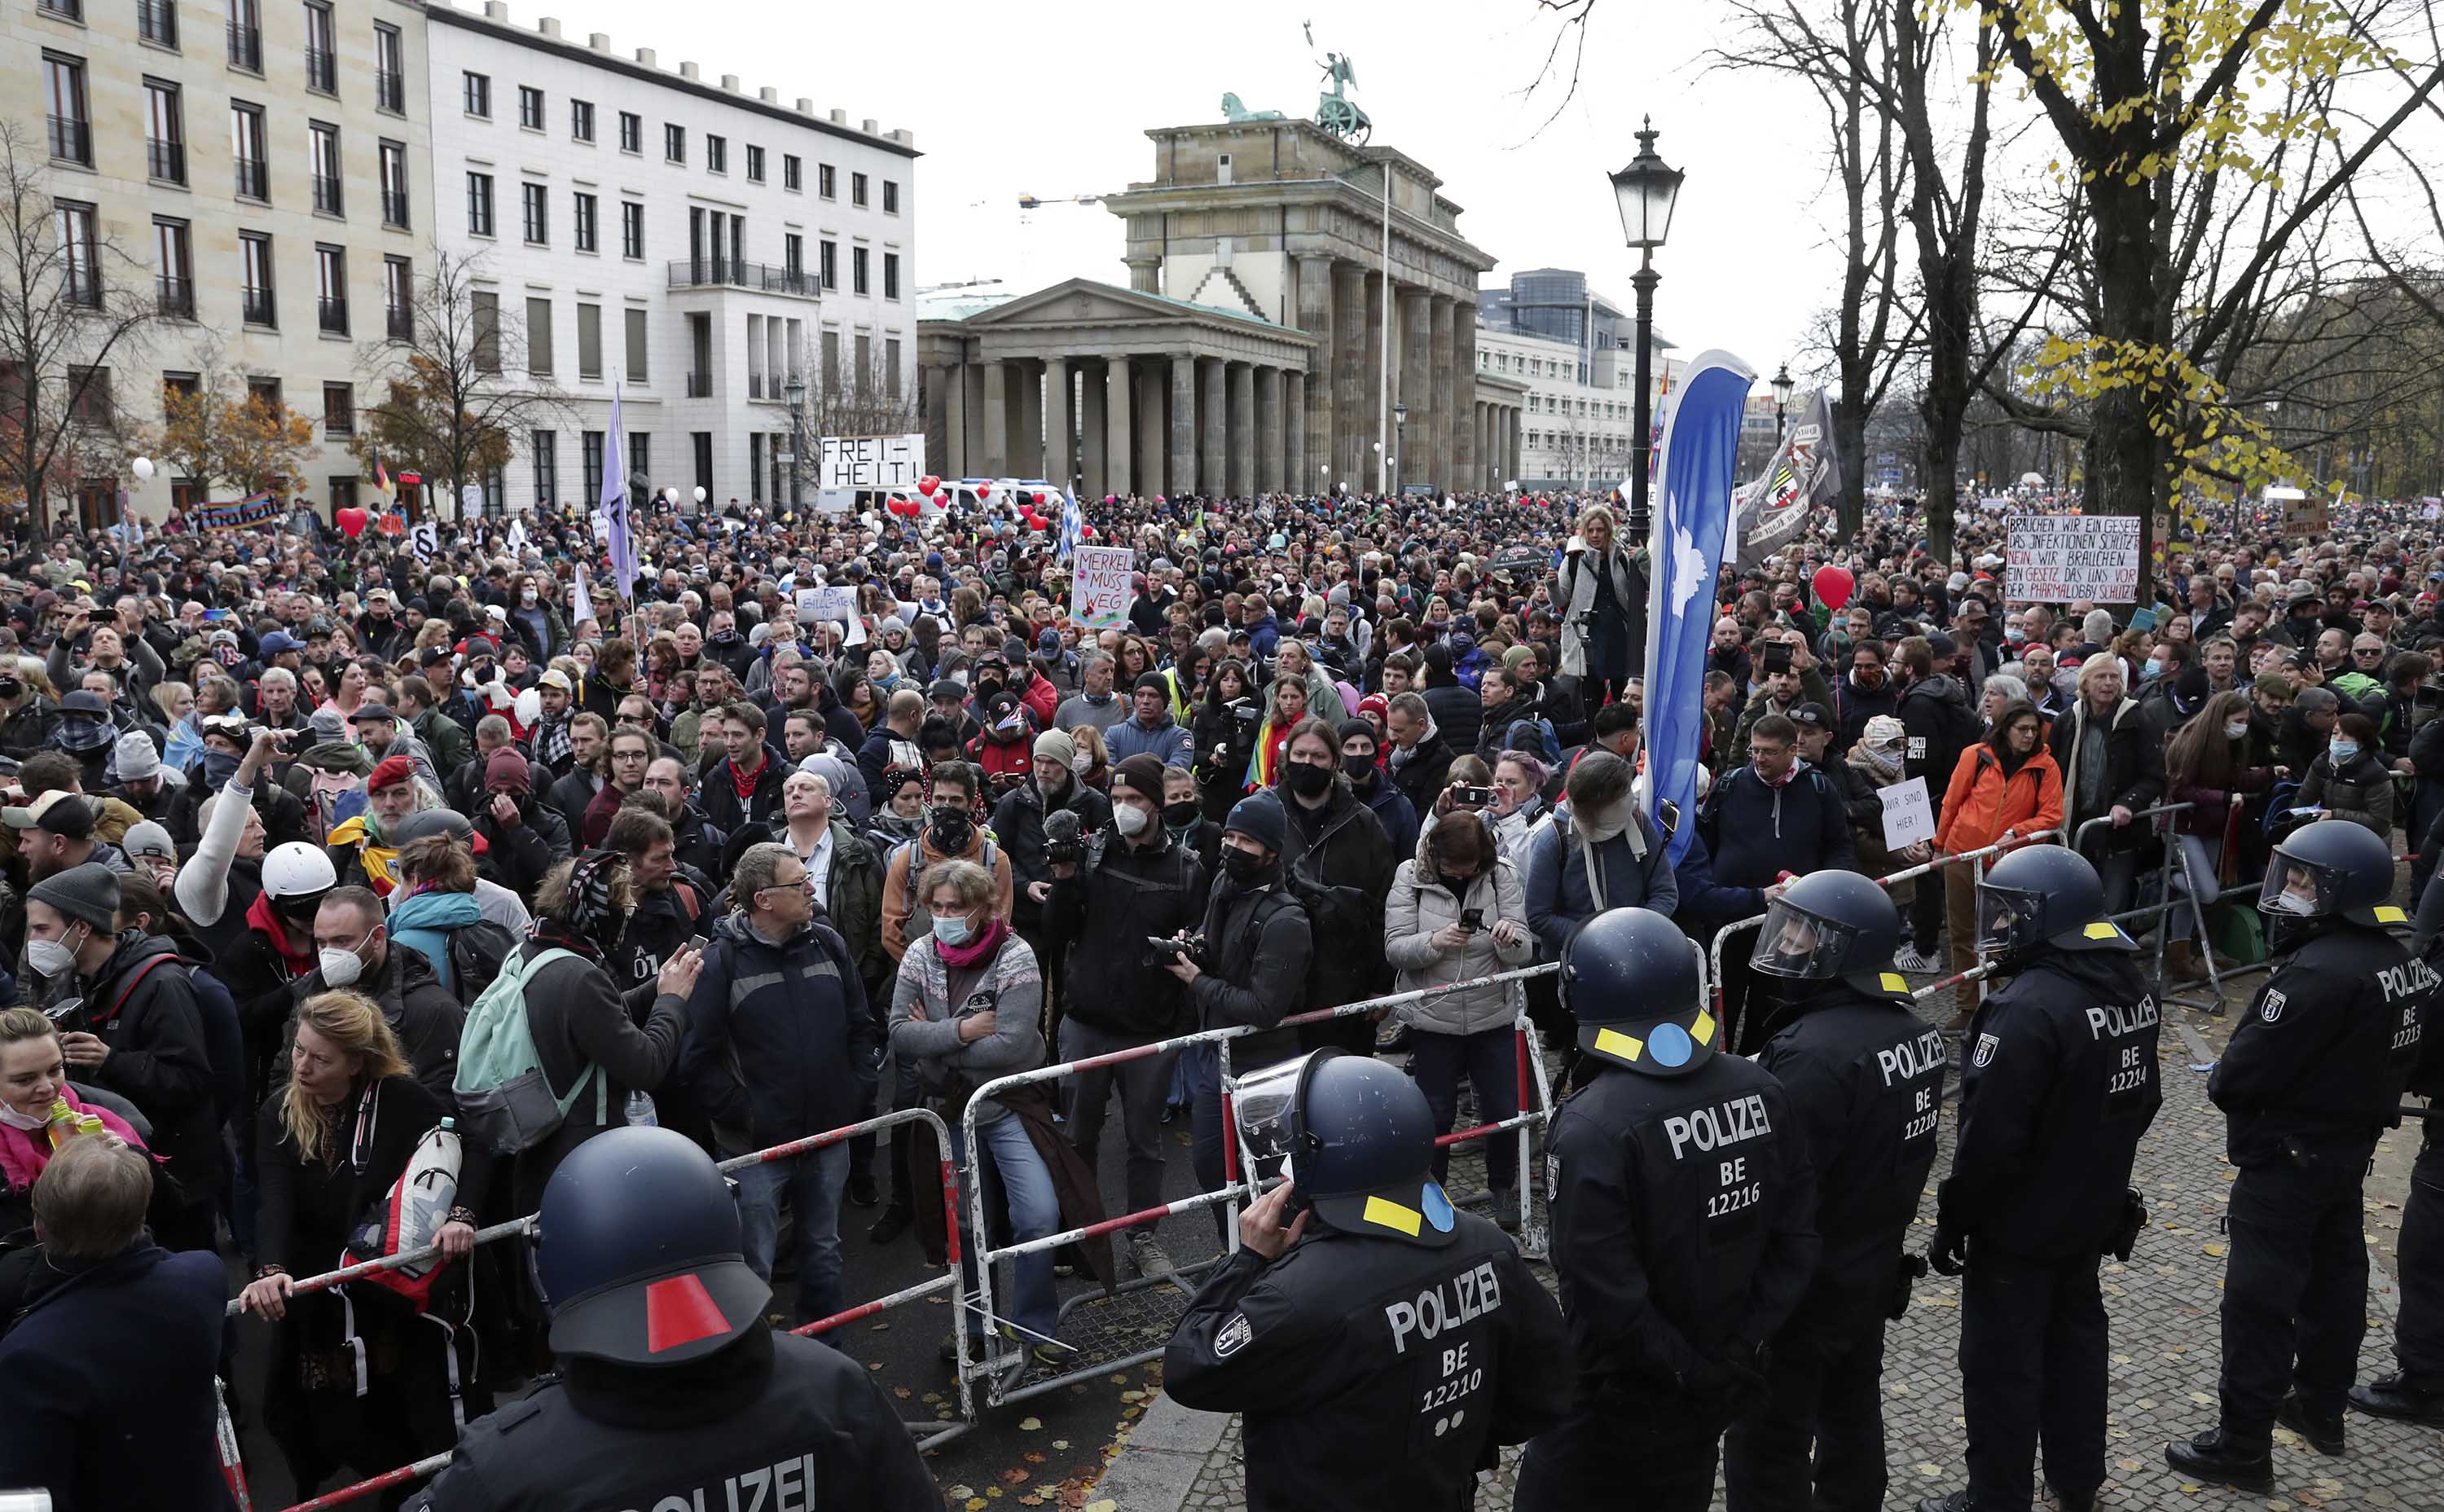 Police officers block a road as people attend a protest rally in front of the Brandenburg Gate in Berlin, Germany, on Wednesday.